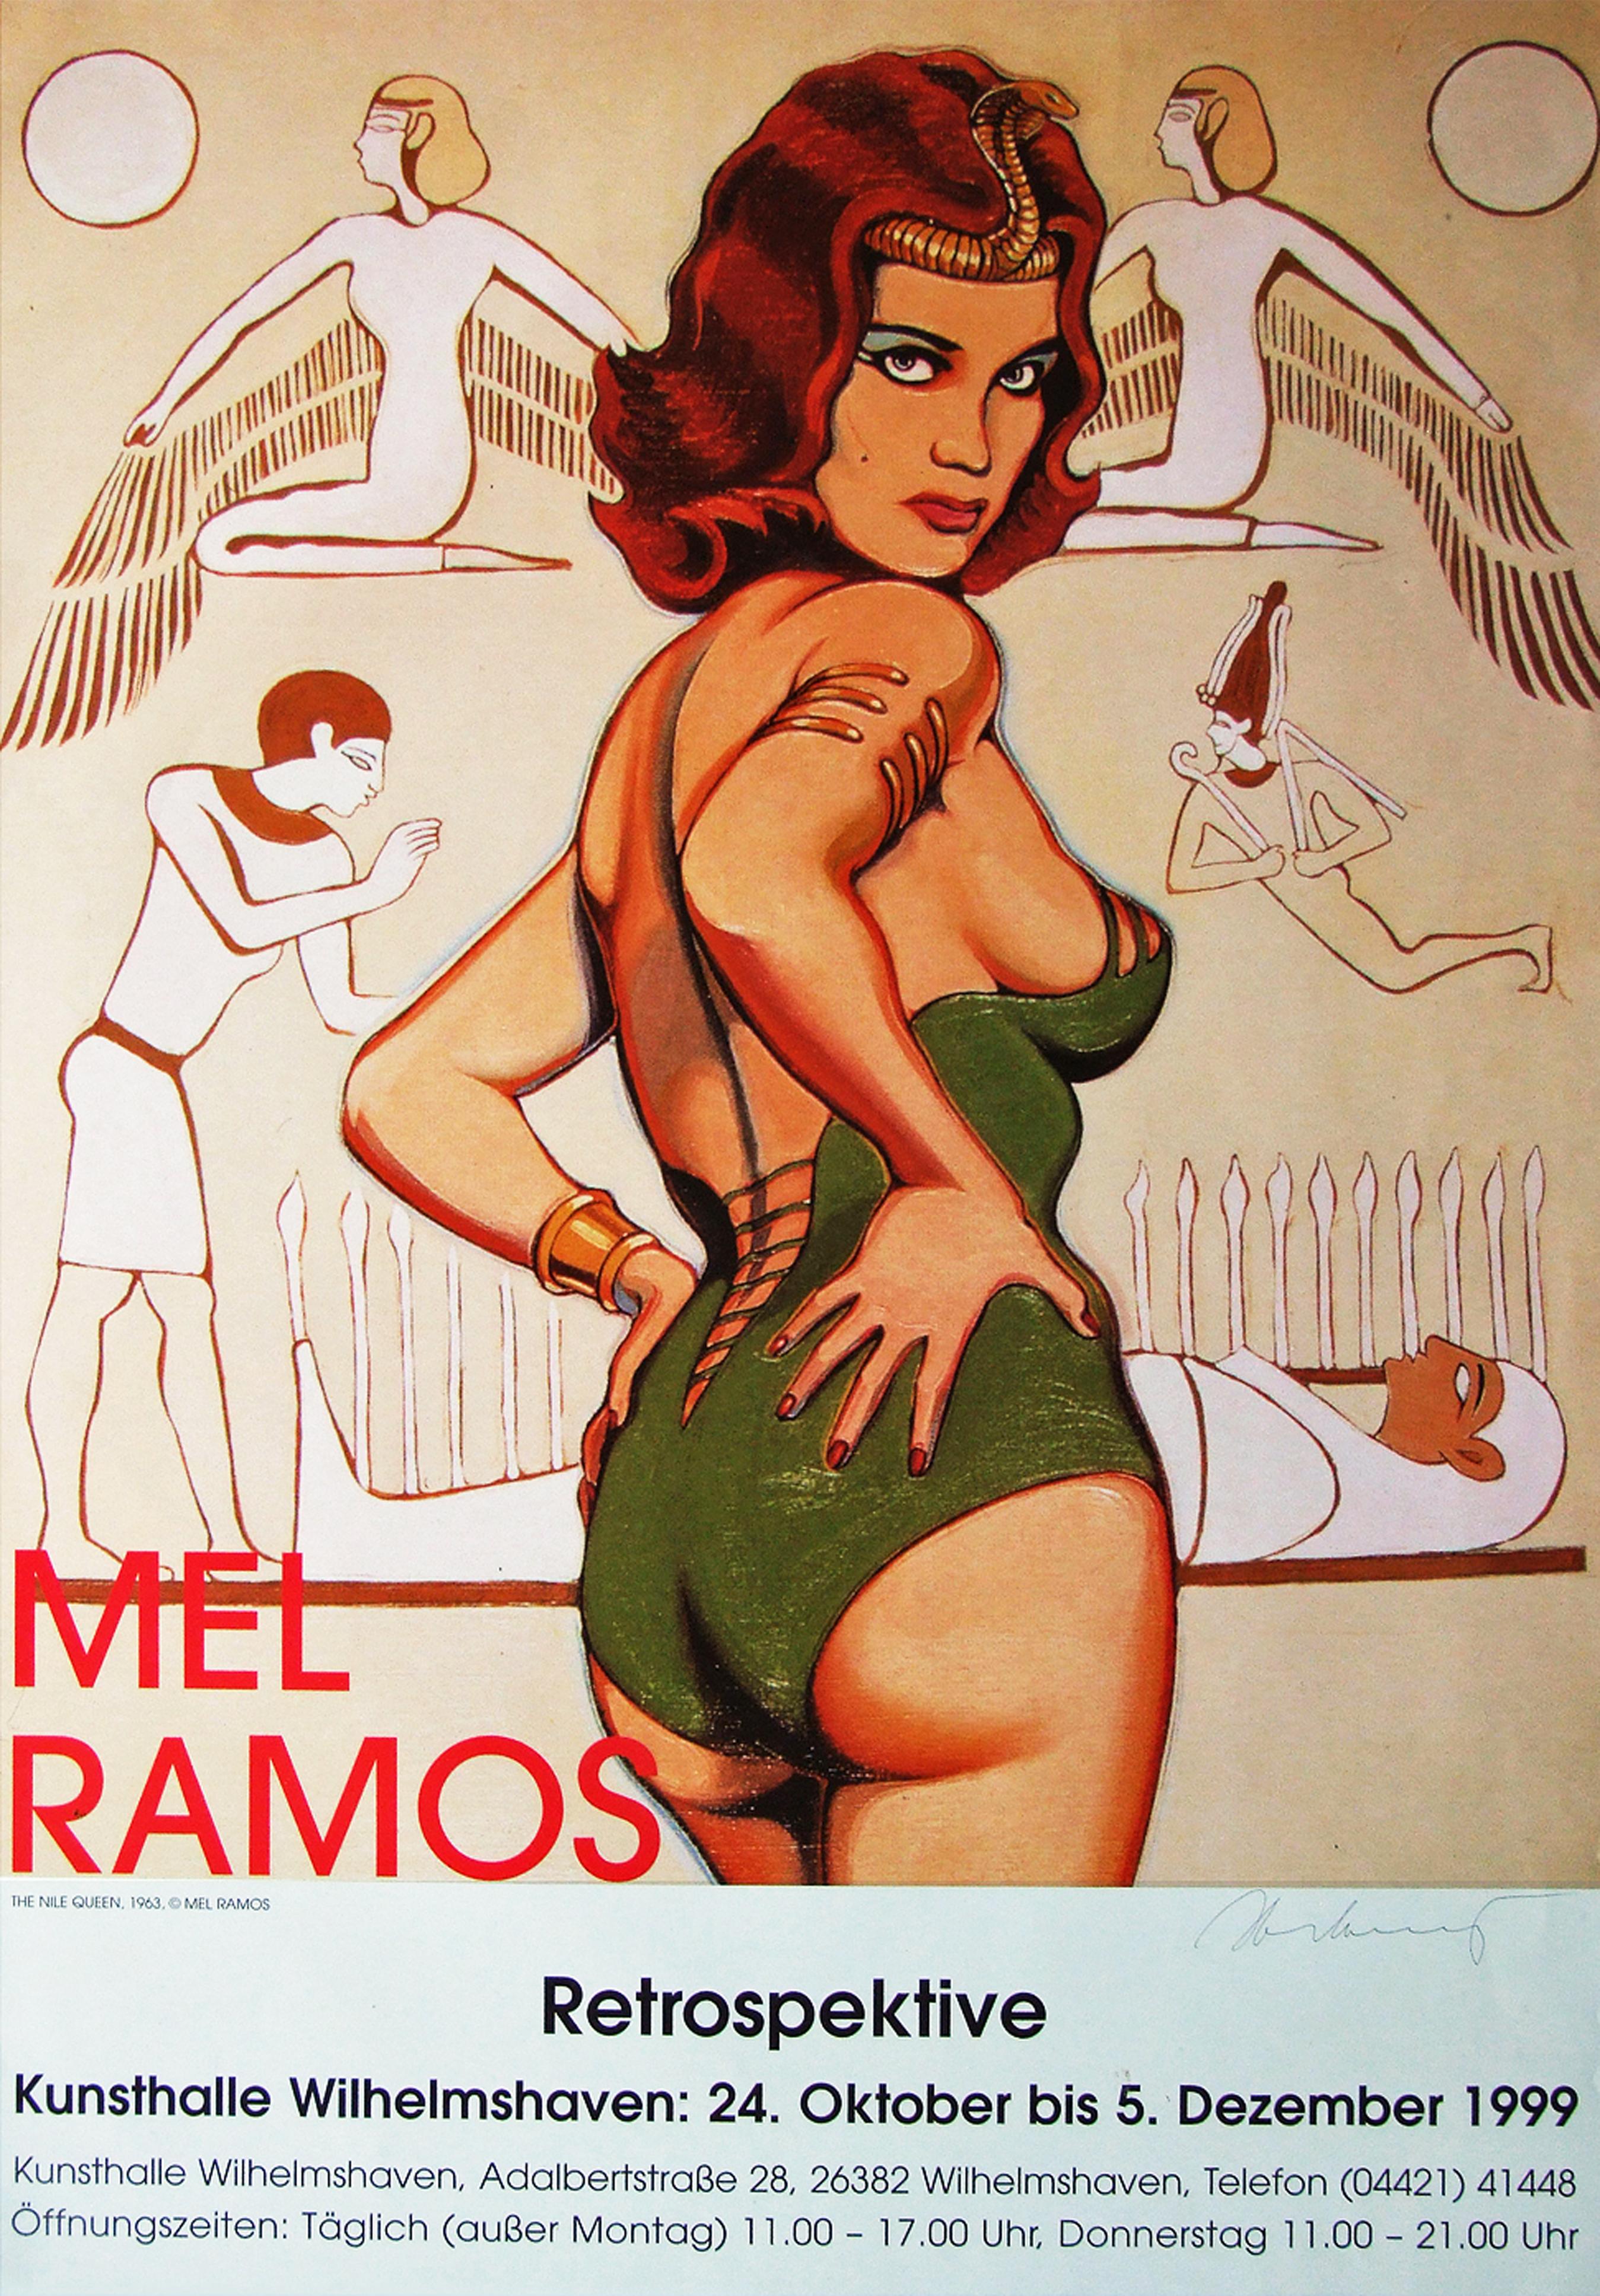 Original 1999 promotional poster for the Mel Ramos exhibition at the Kunsthalle Wilhelmshaven, Germany.

First edition color offset lithograph. Hand signed by the artist in ink.

Rolled.

Measures: L 84.5cm x W 59.5cm.